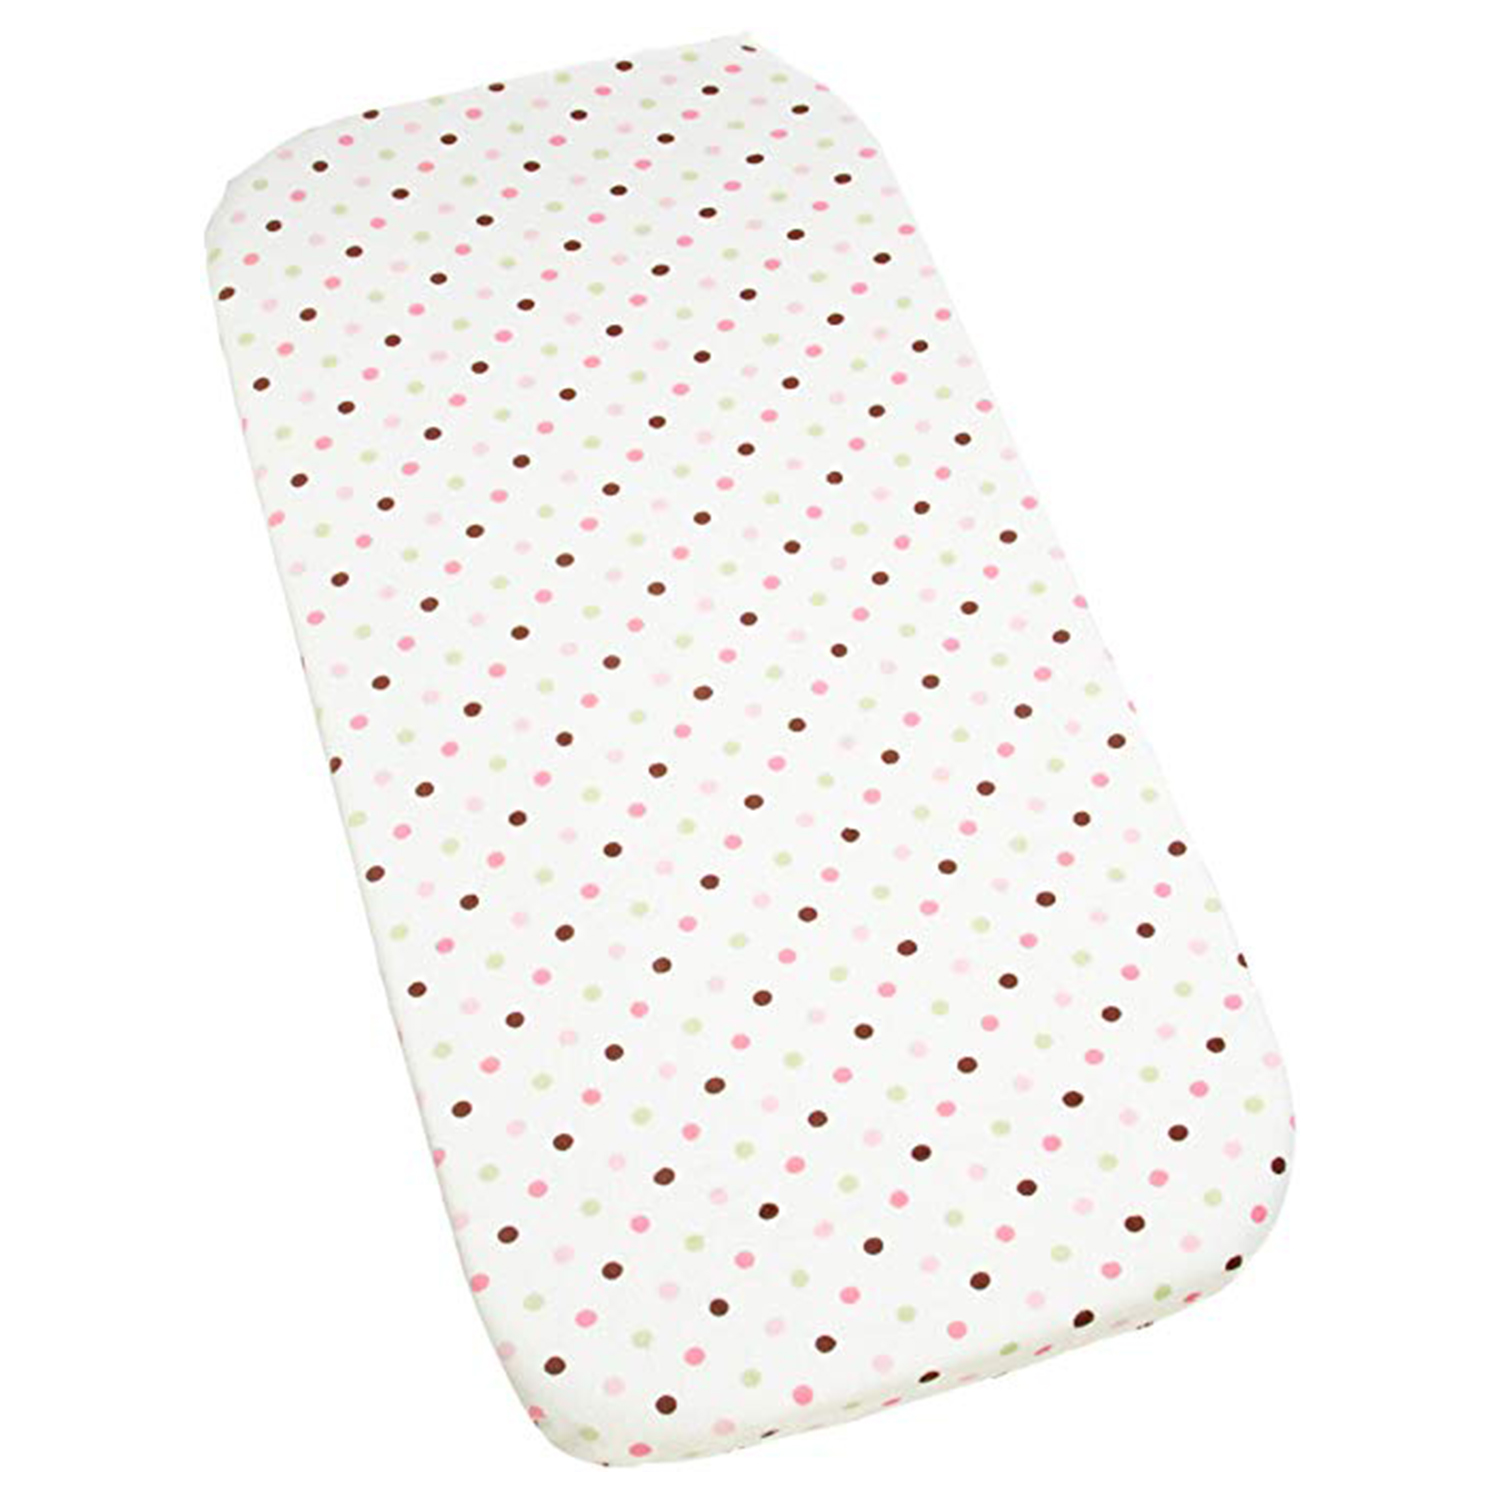 Carter's Carters Super Soft Printed Changing Pad Cover 100% Polyester - Pink/Green Dot